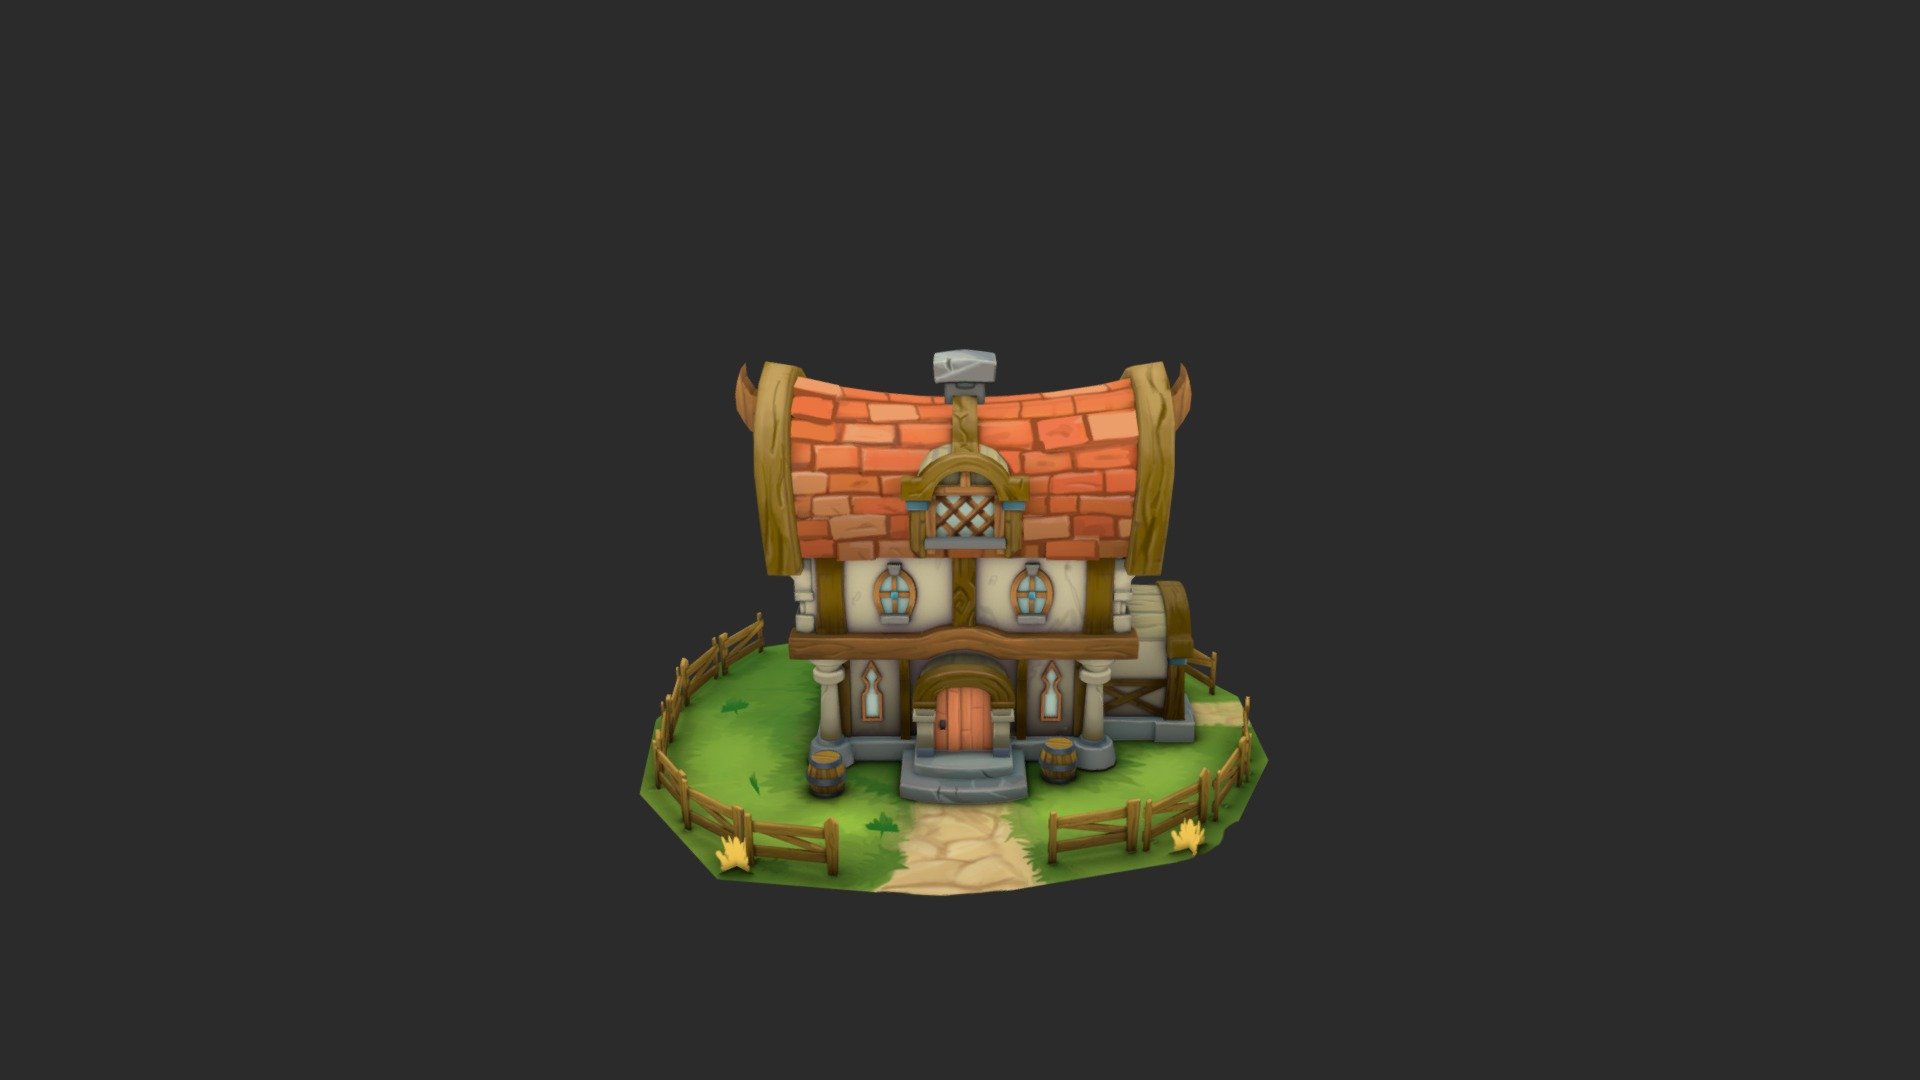 A cute house i modeled and textured based on the original concept. textures are all hand painted on diffuse. Definitely learned a lot working on this!
original concept by Seojin Lee(Dune)

https://www.artstation.com/artwork/BX2ml - Hand painted House - 3D model by Christopher Chin (@chrisjohnchin) 3d model